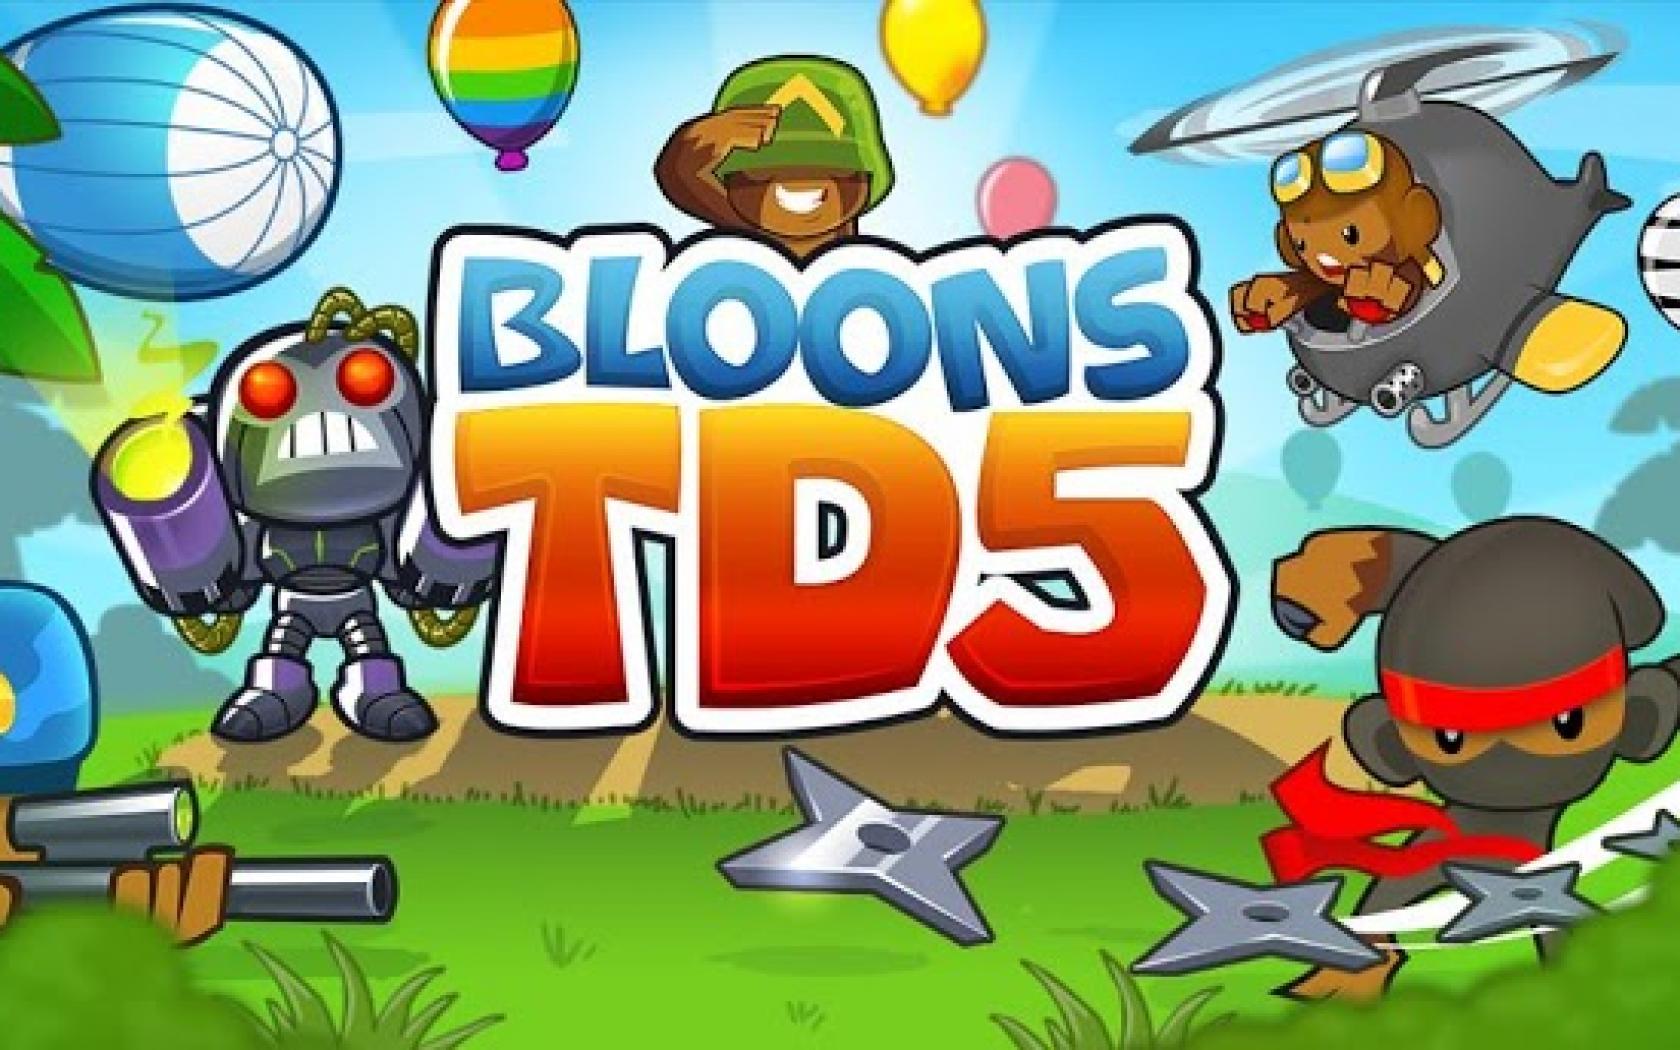 Free Download Bloons TD 6 IOS/APK Version Full Game Latest Version For Iphone 2